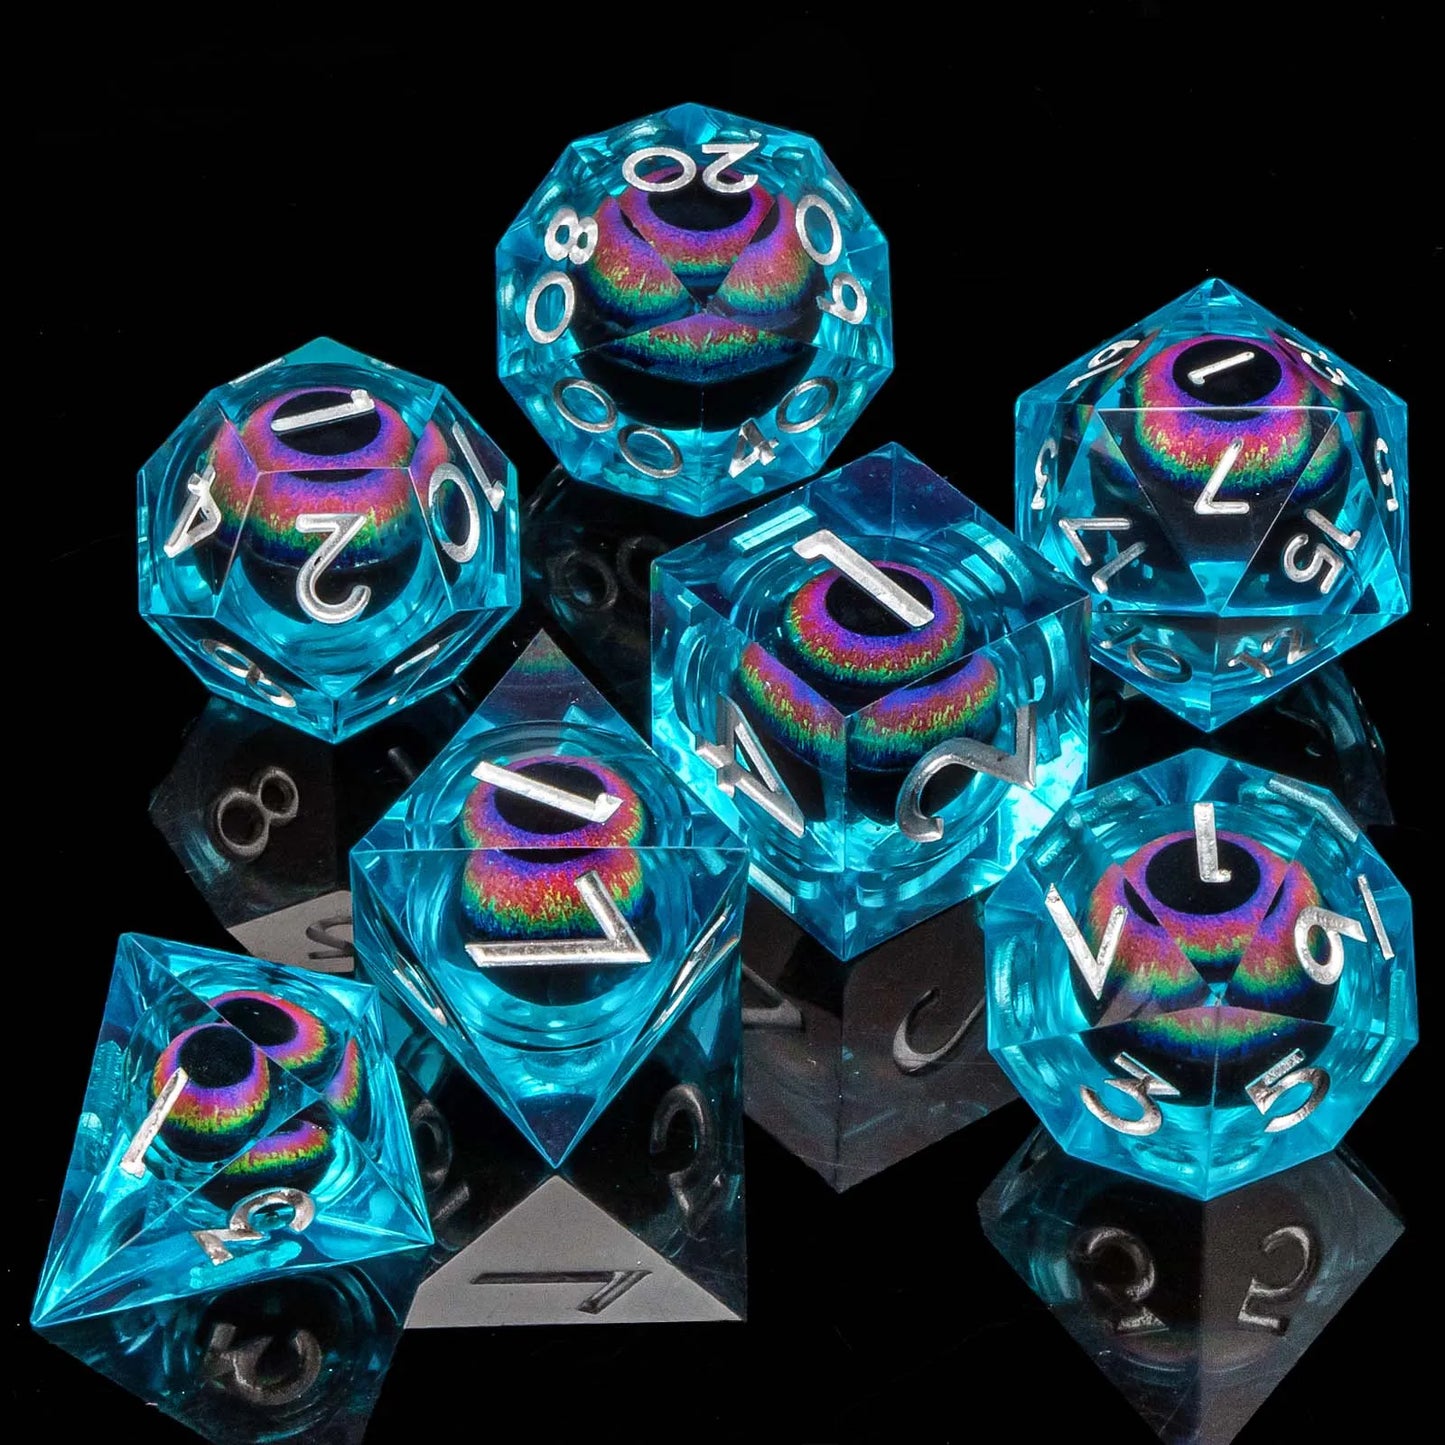 D and D Flowing Sand Sharp Edge Dragon Eye Dnd Resin RPG Polyhedral D&D Dice Set For Dungeon and Dragon Pathfinder Role Playing AZ20